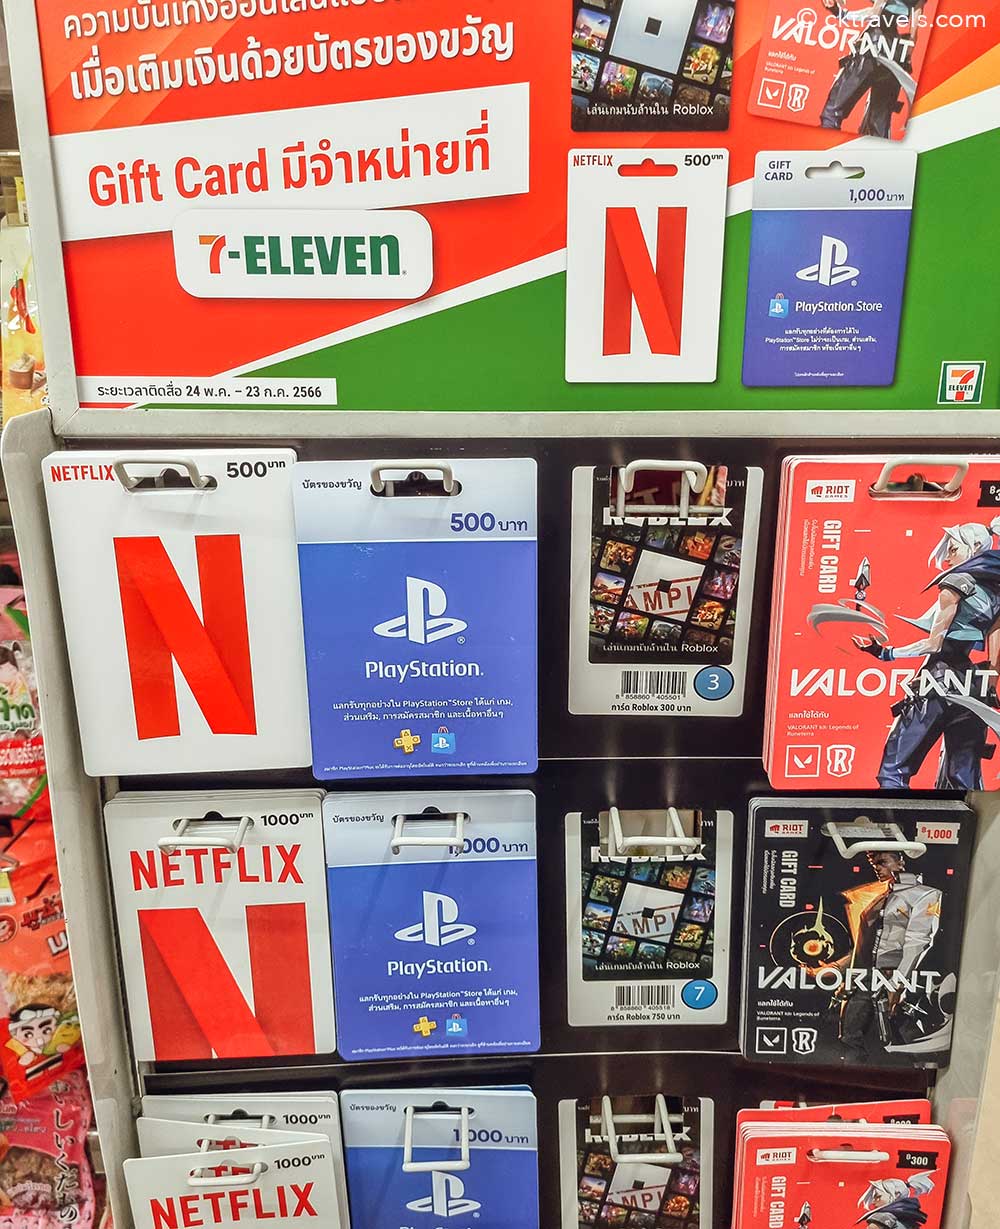 Netflix Playstation and Valorant gift voucher cards 7 eleven